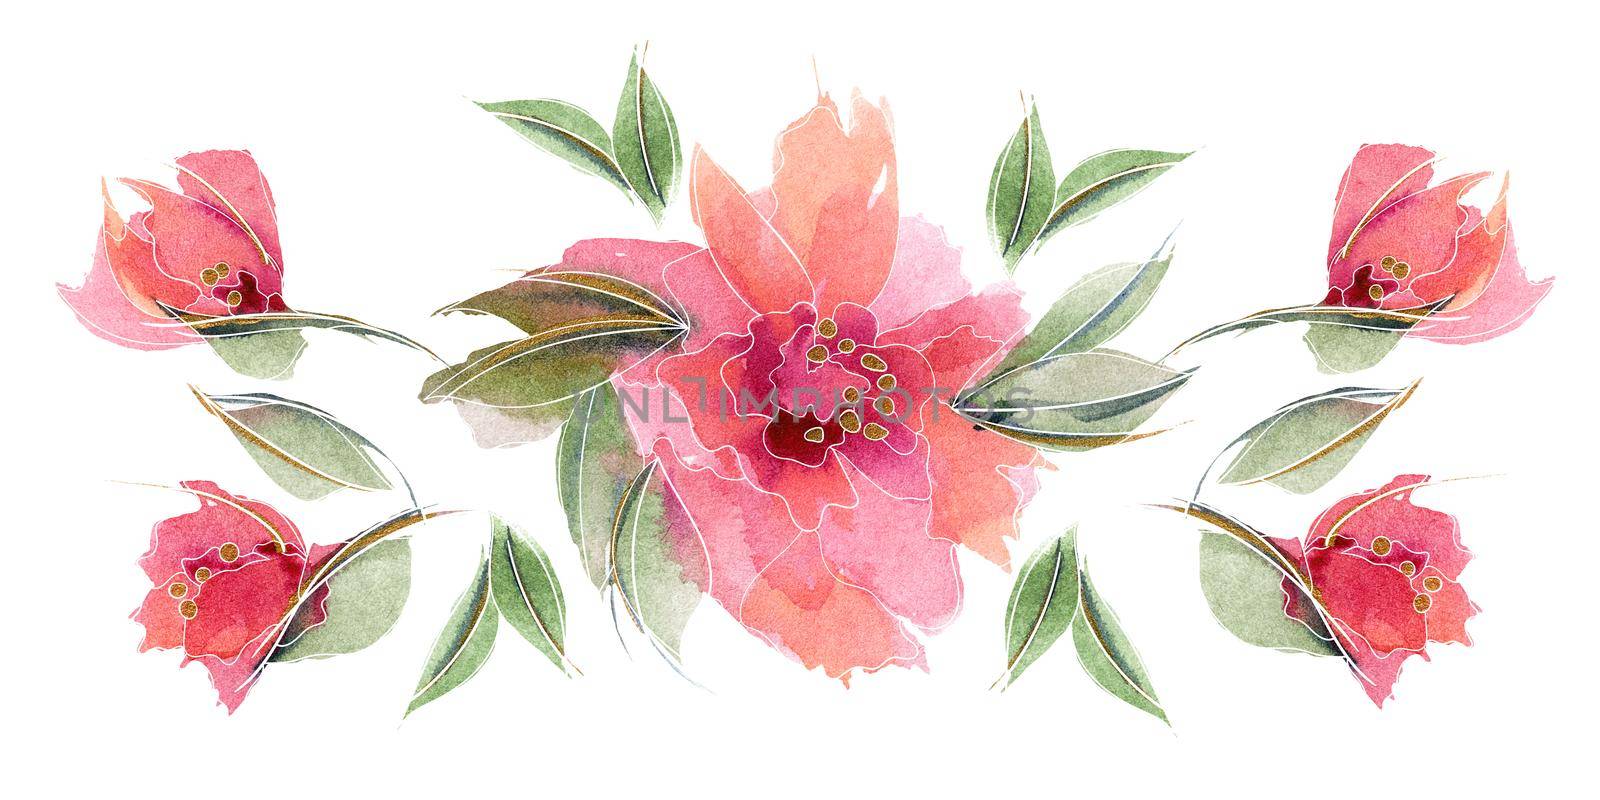 Pink floral chaplet composition with delicate rose flowers and leaves by Xeniasnowstorm